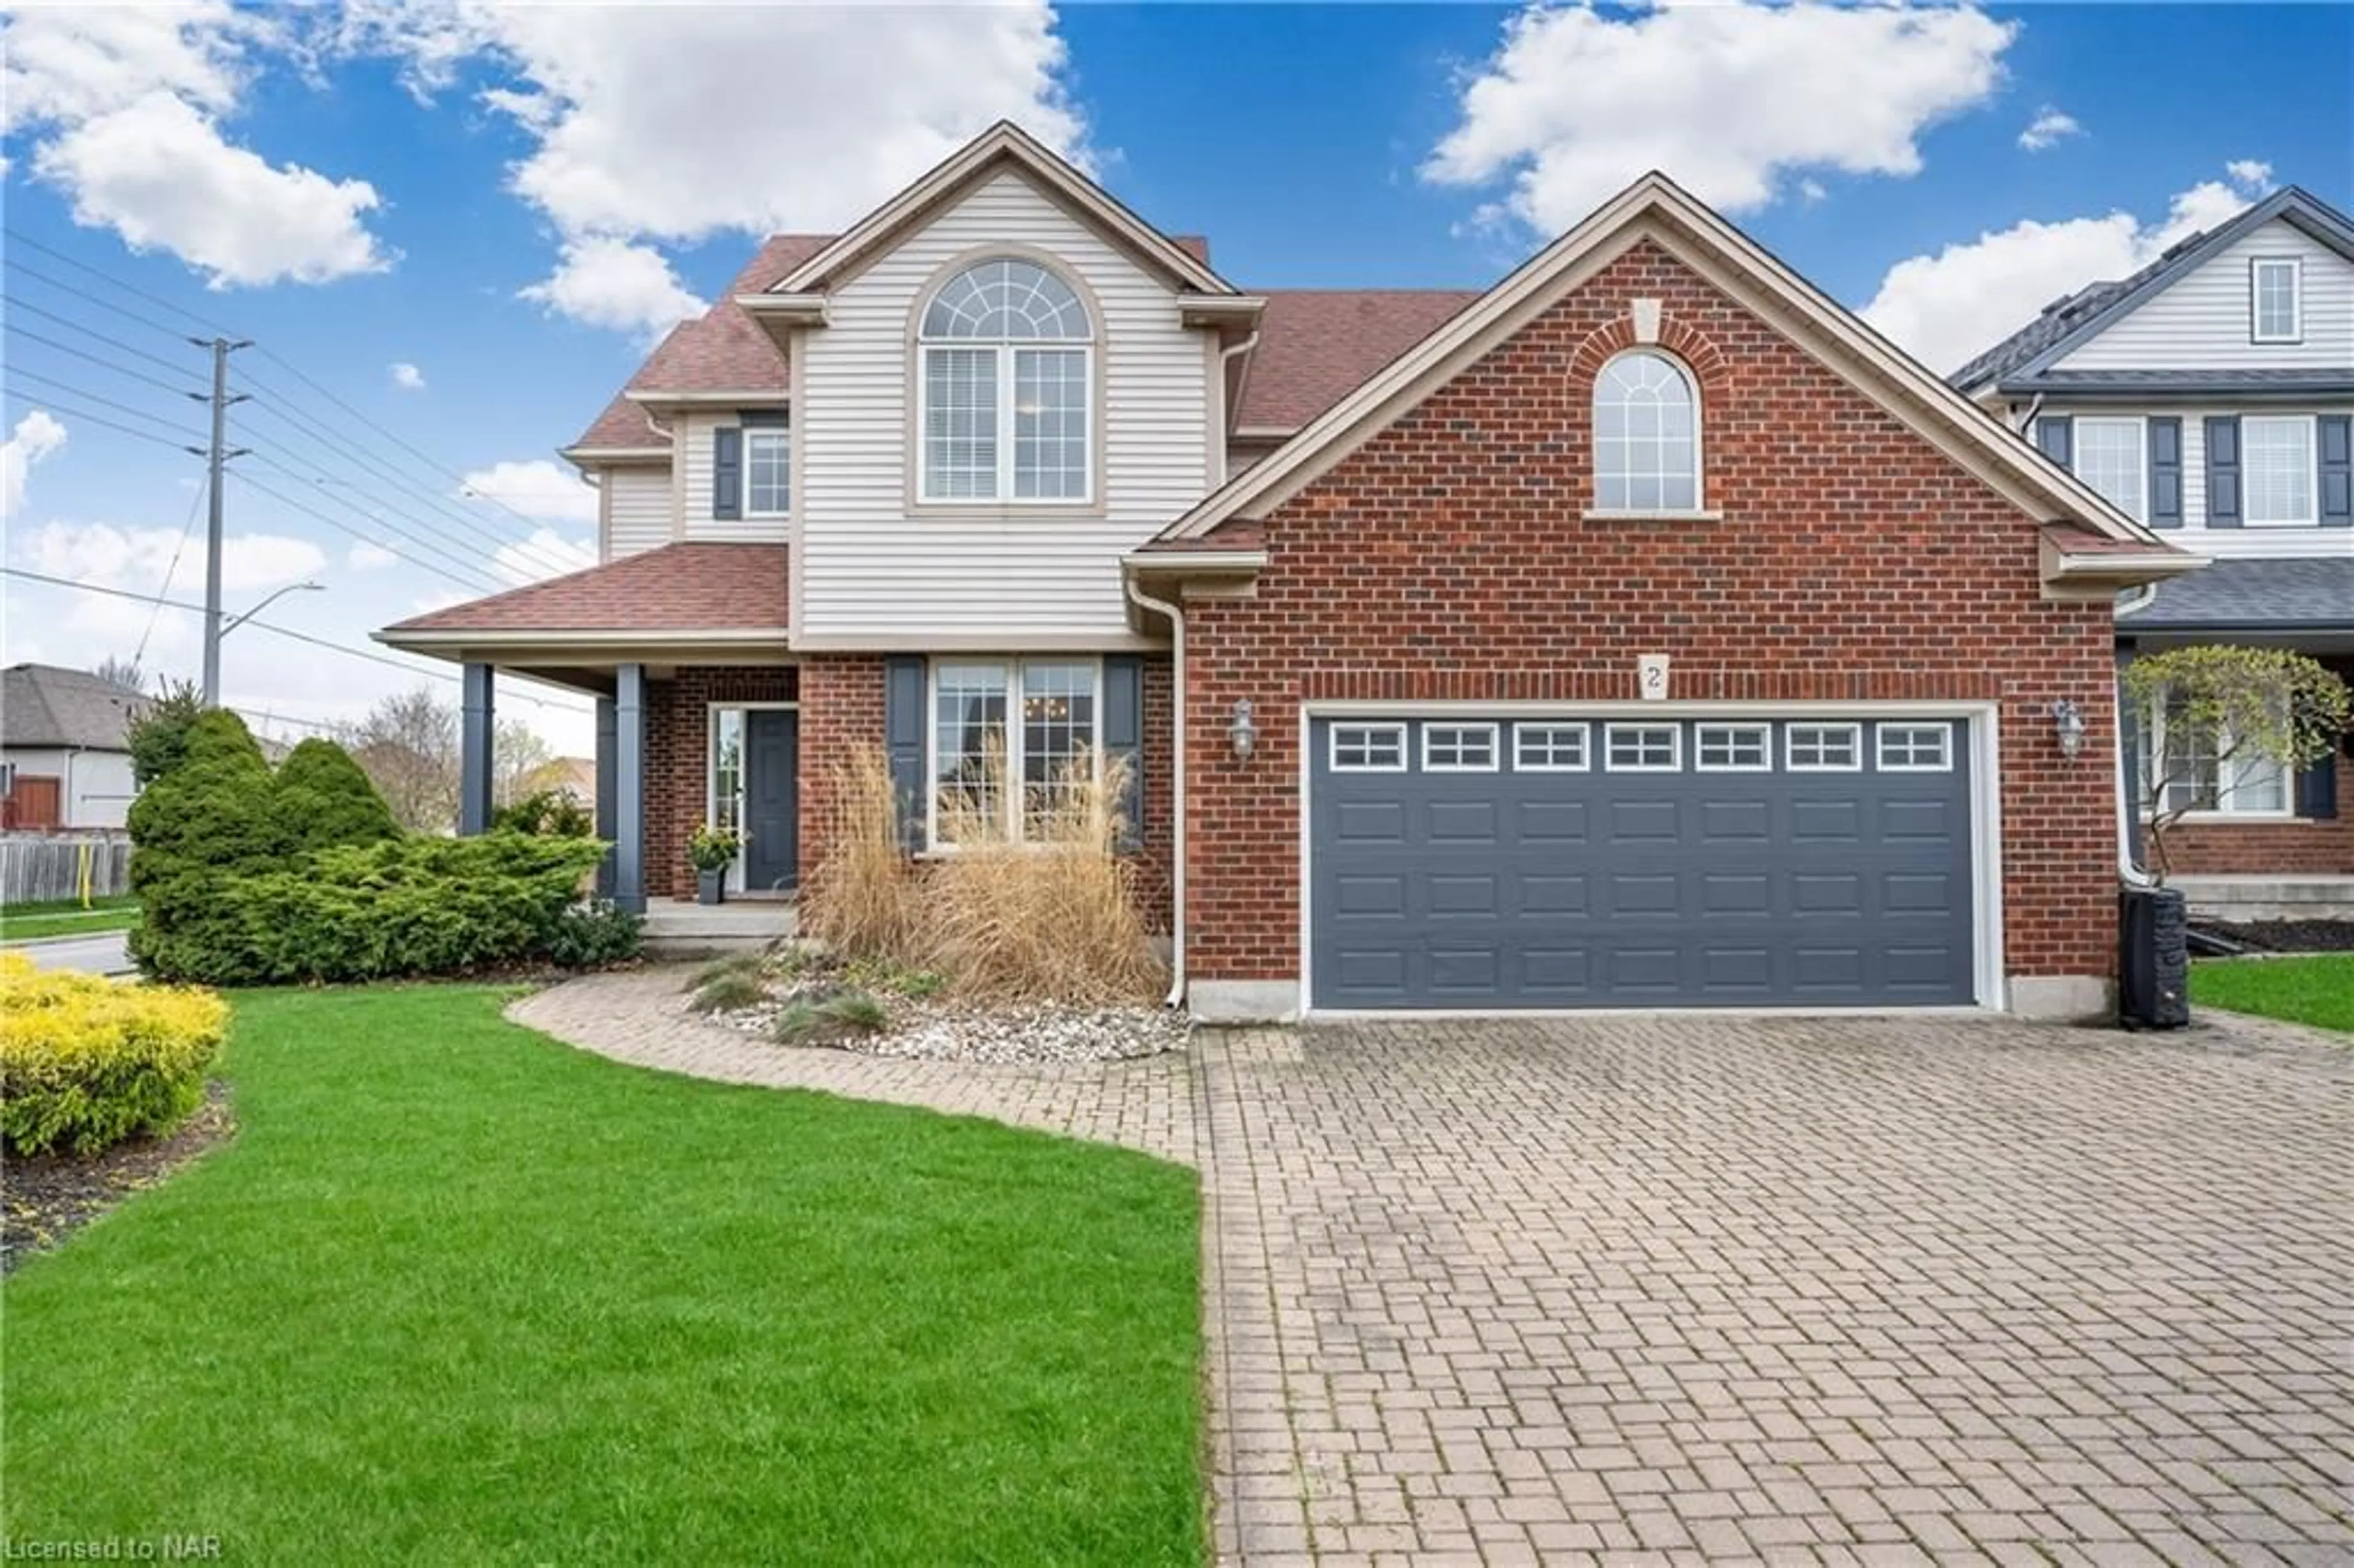 Home with brick exterior material for 2 Briarwood Dr, St. Catharines Ontario L2S 4A7